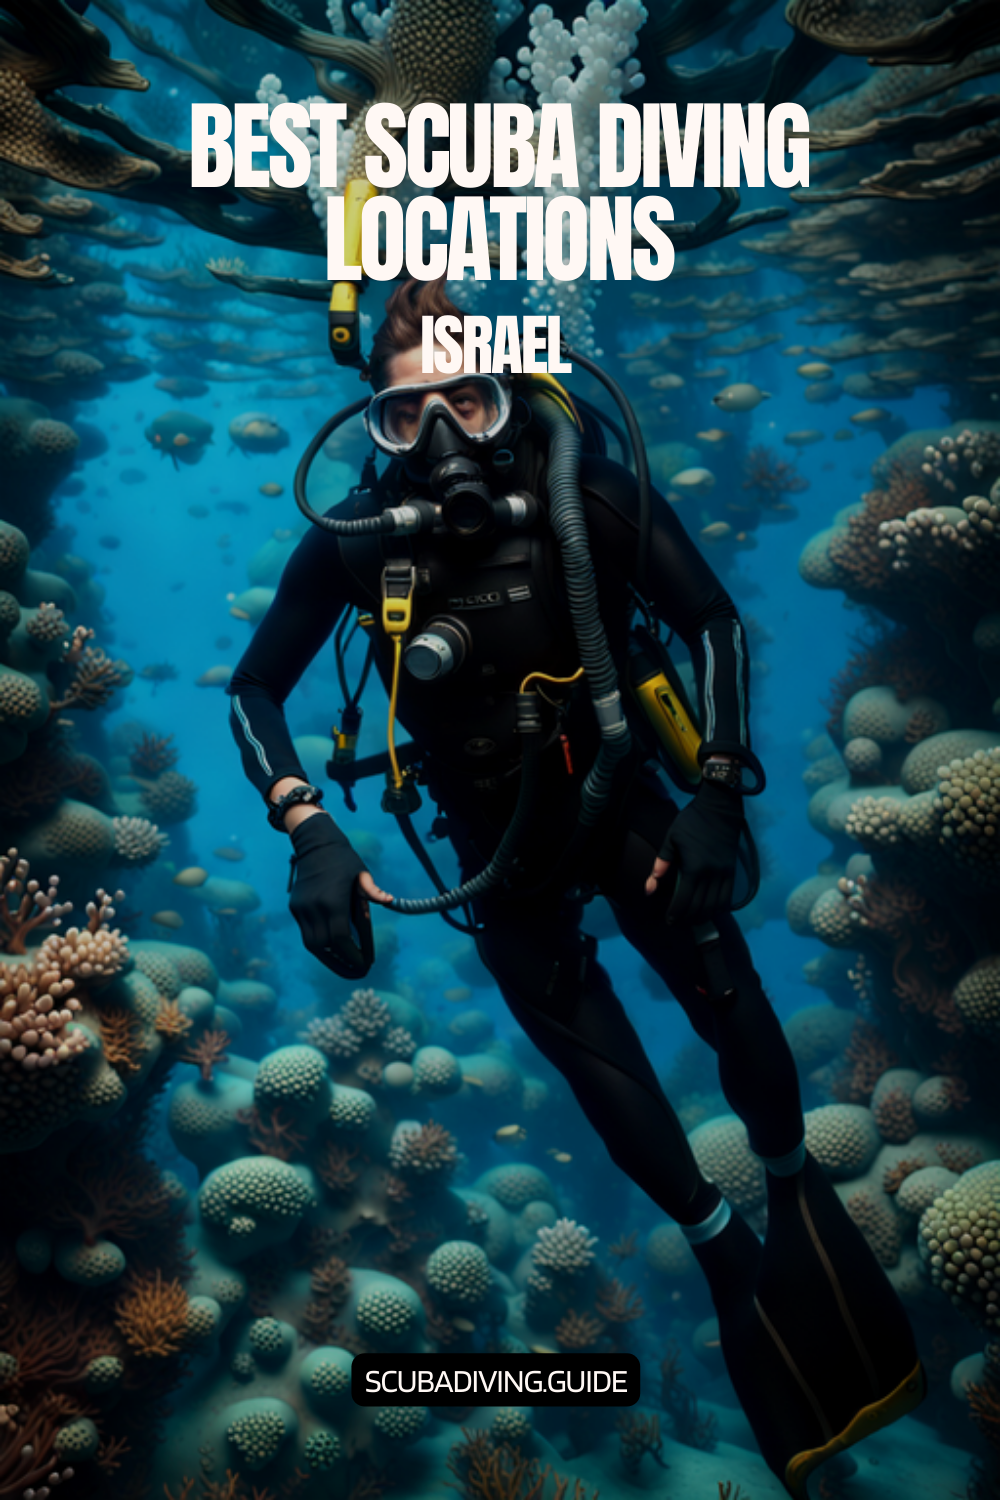 Scuba Diving Locations in Israel